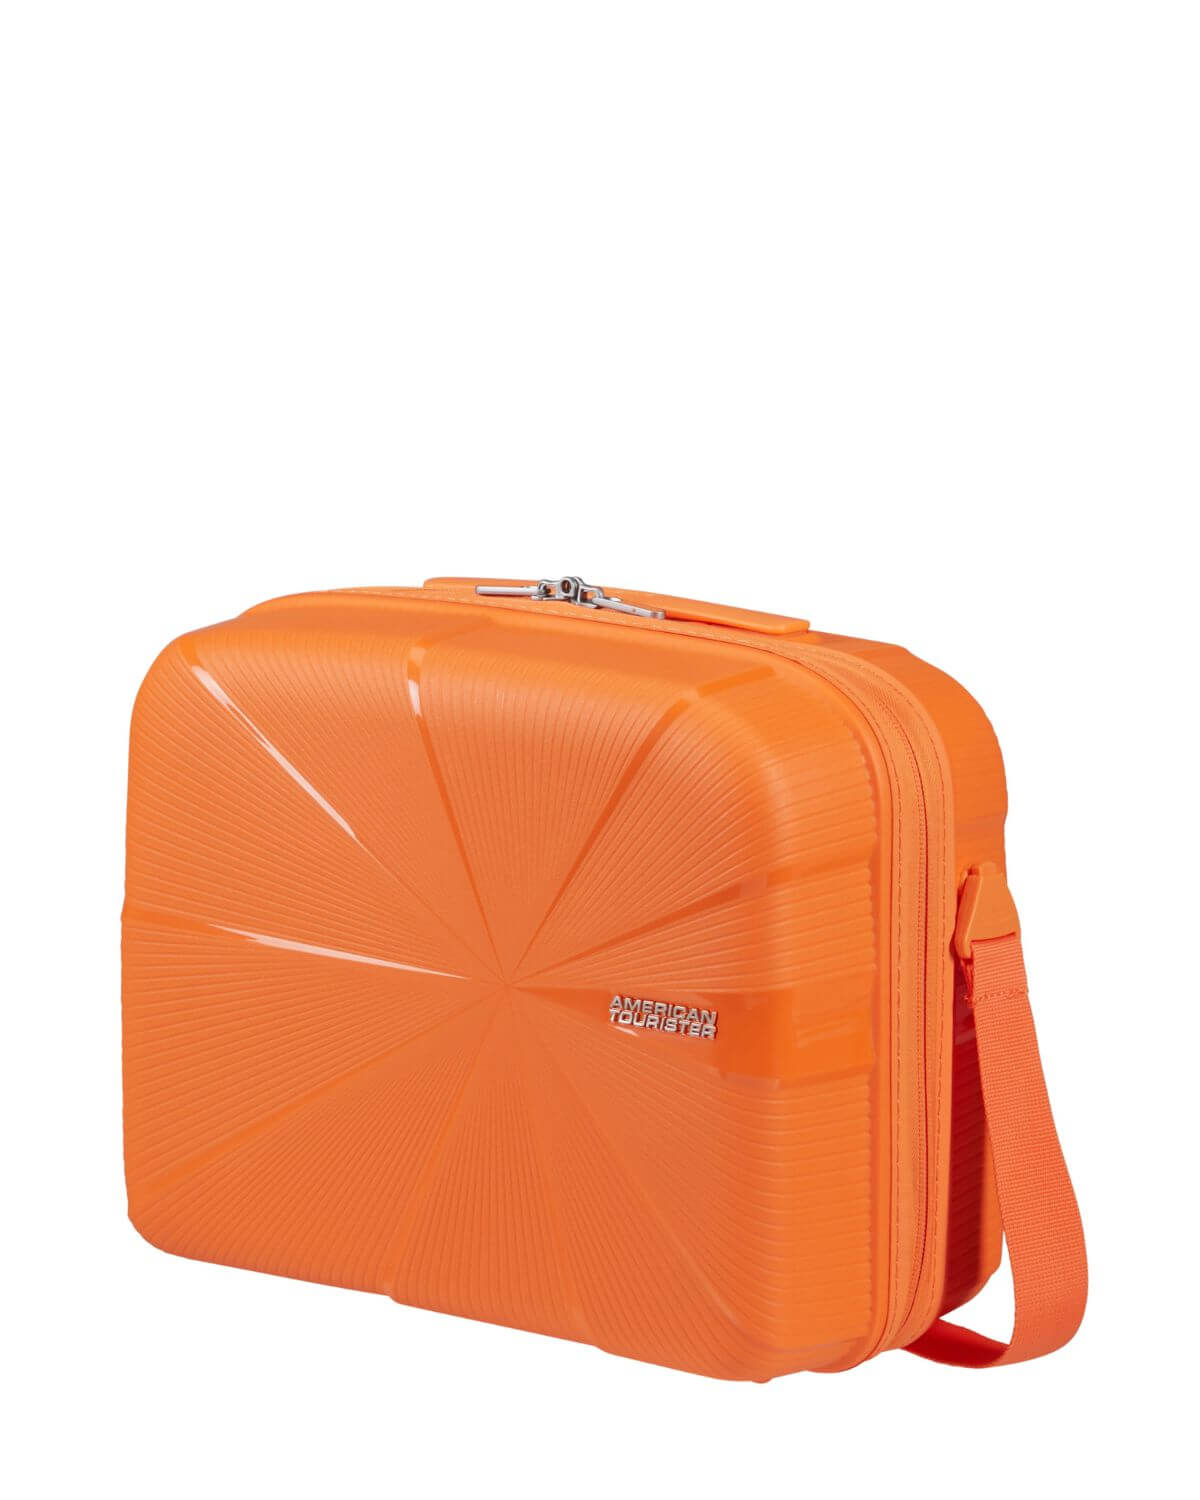 BEAUTY CASE AMERICAN TOURISTER STARVIBE